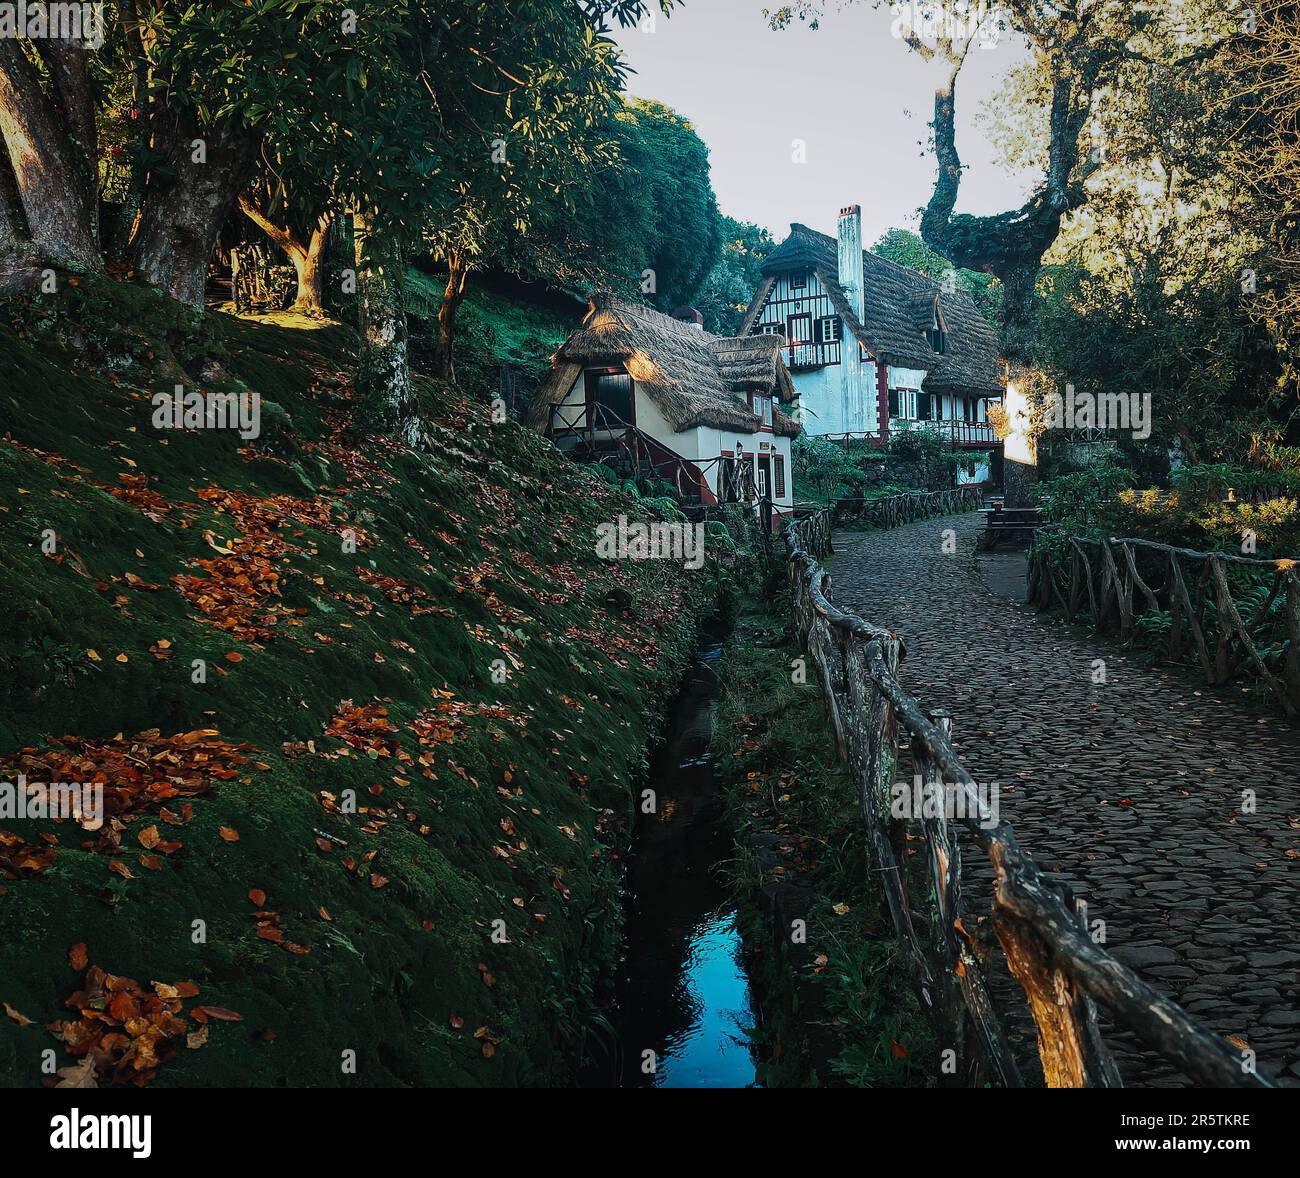 A scenic view of a stone paved path with rustic cottages. Queimadas Forest Park, Madeira. Stock Photo